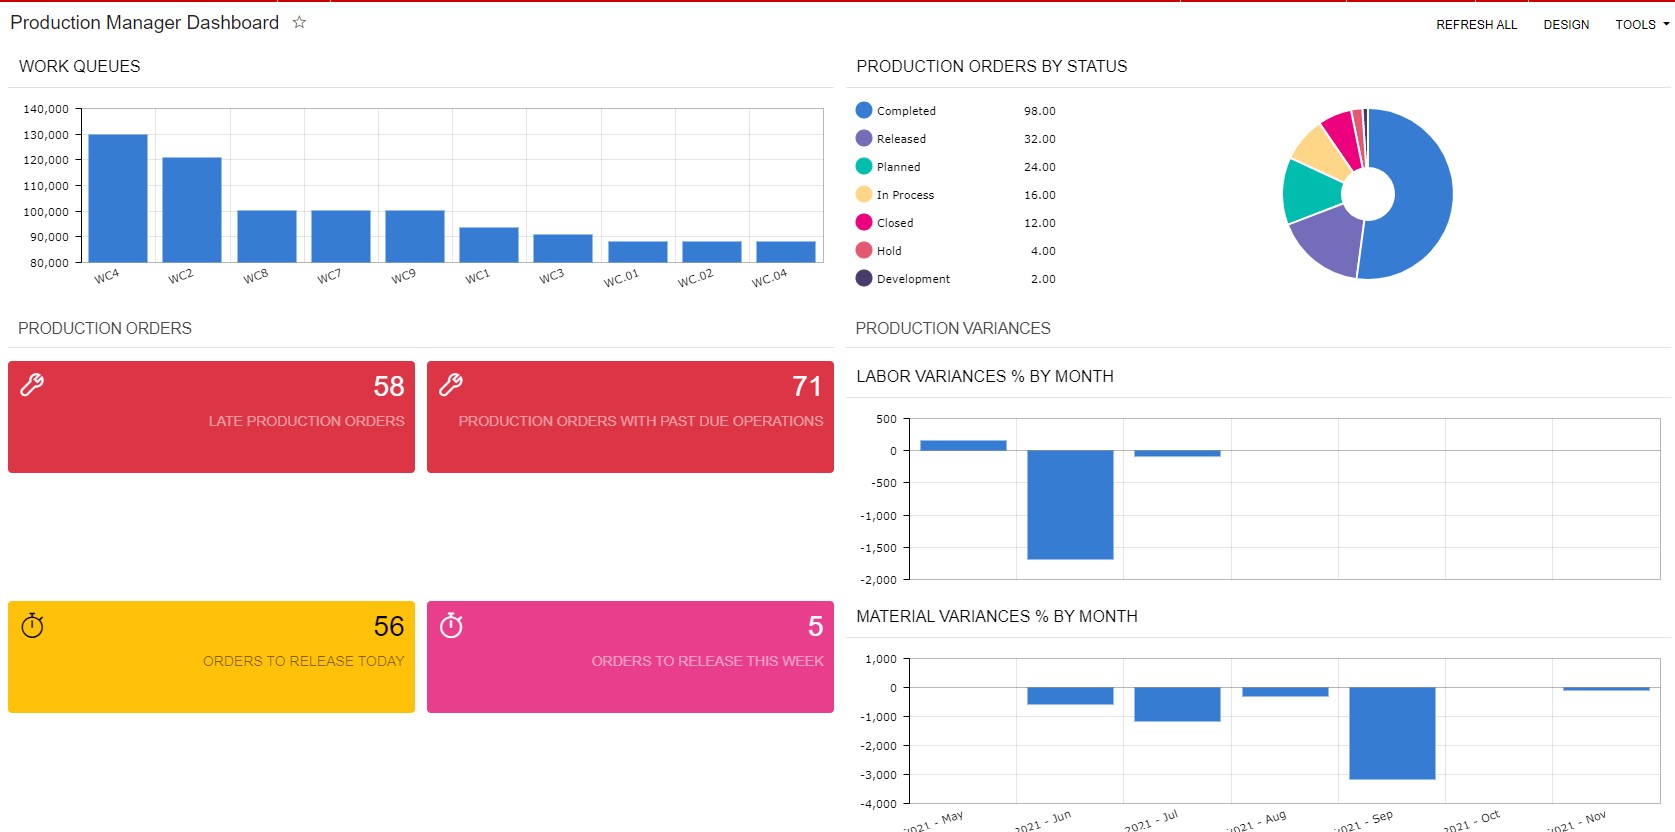 Production Manager Dashboard